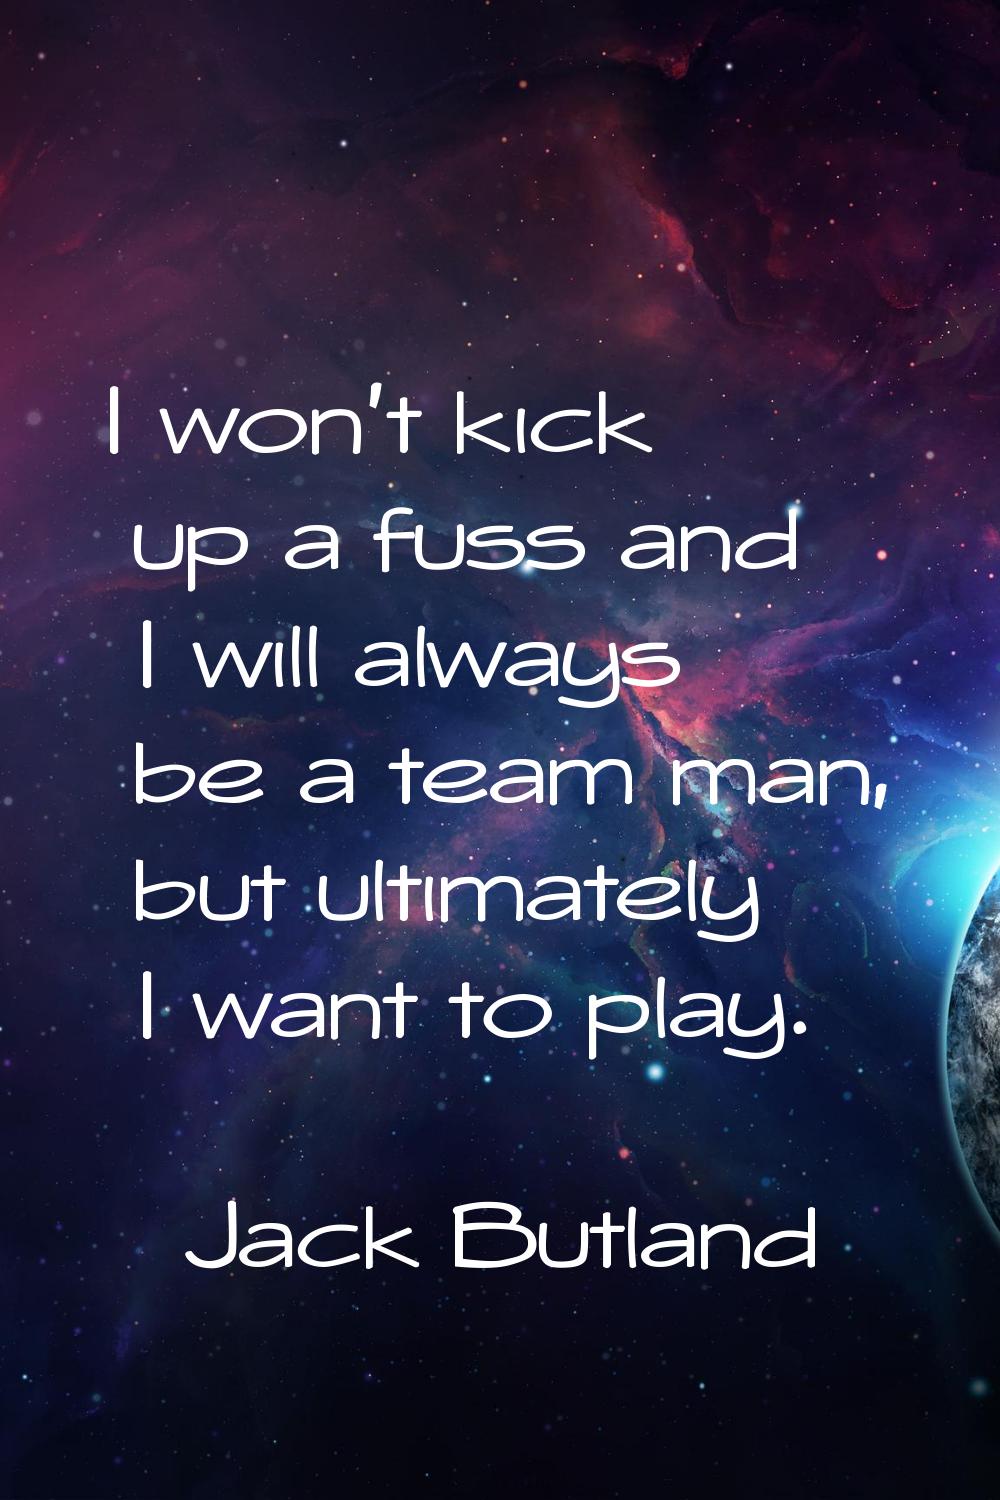 I won't kick up a fuss and I will always be a team man, but ultimately I want to play.